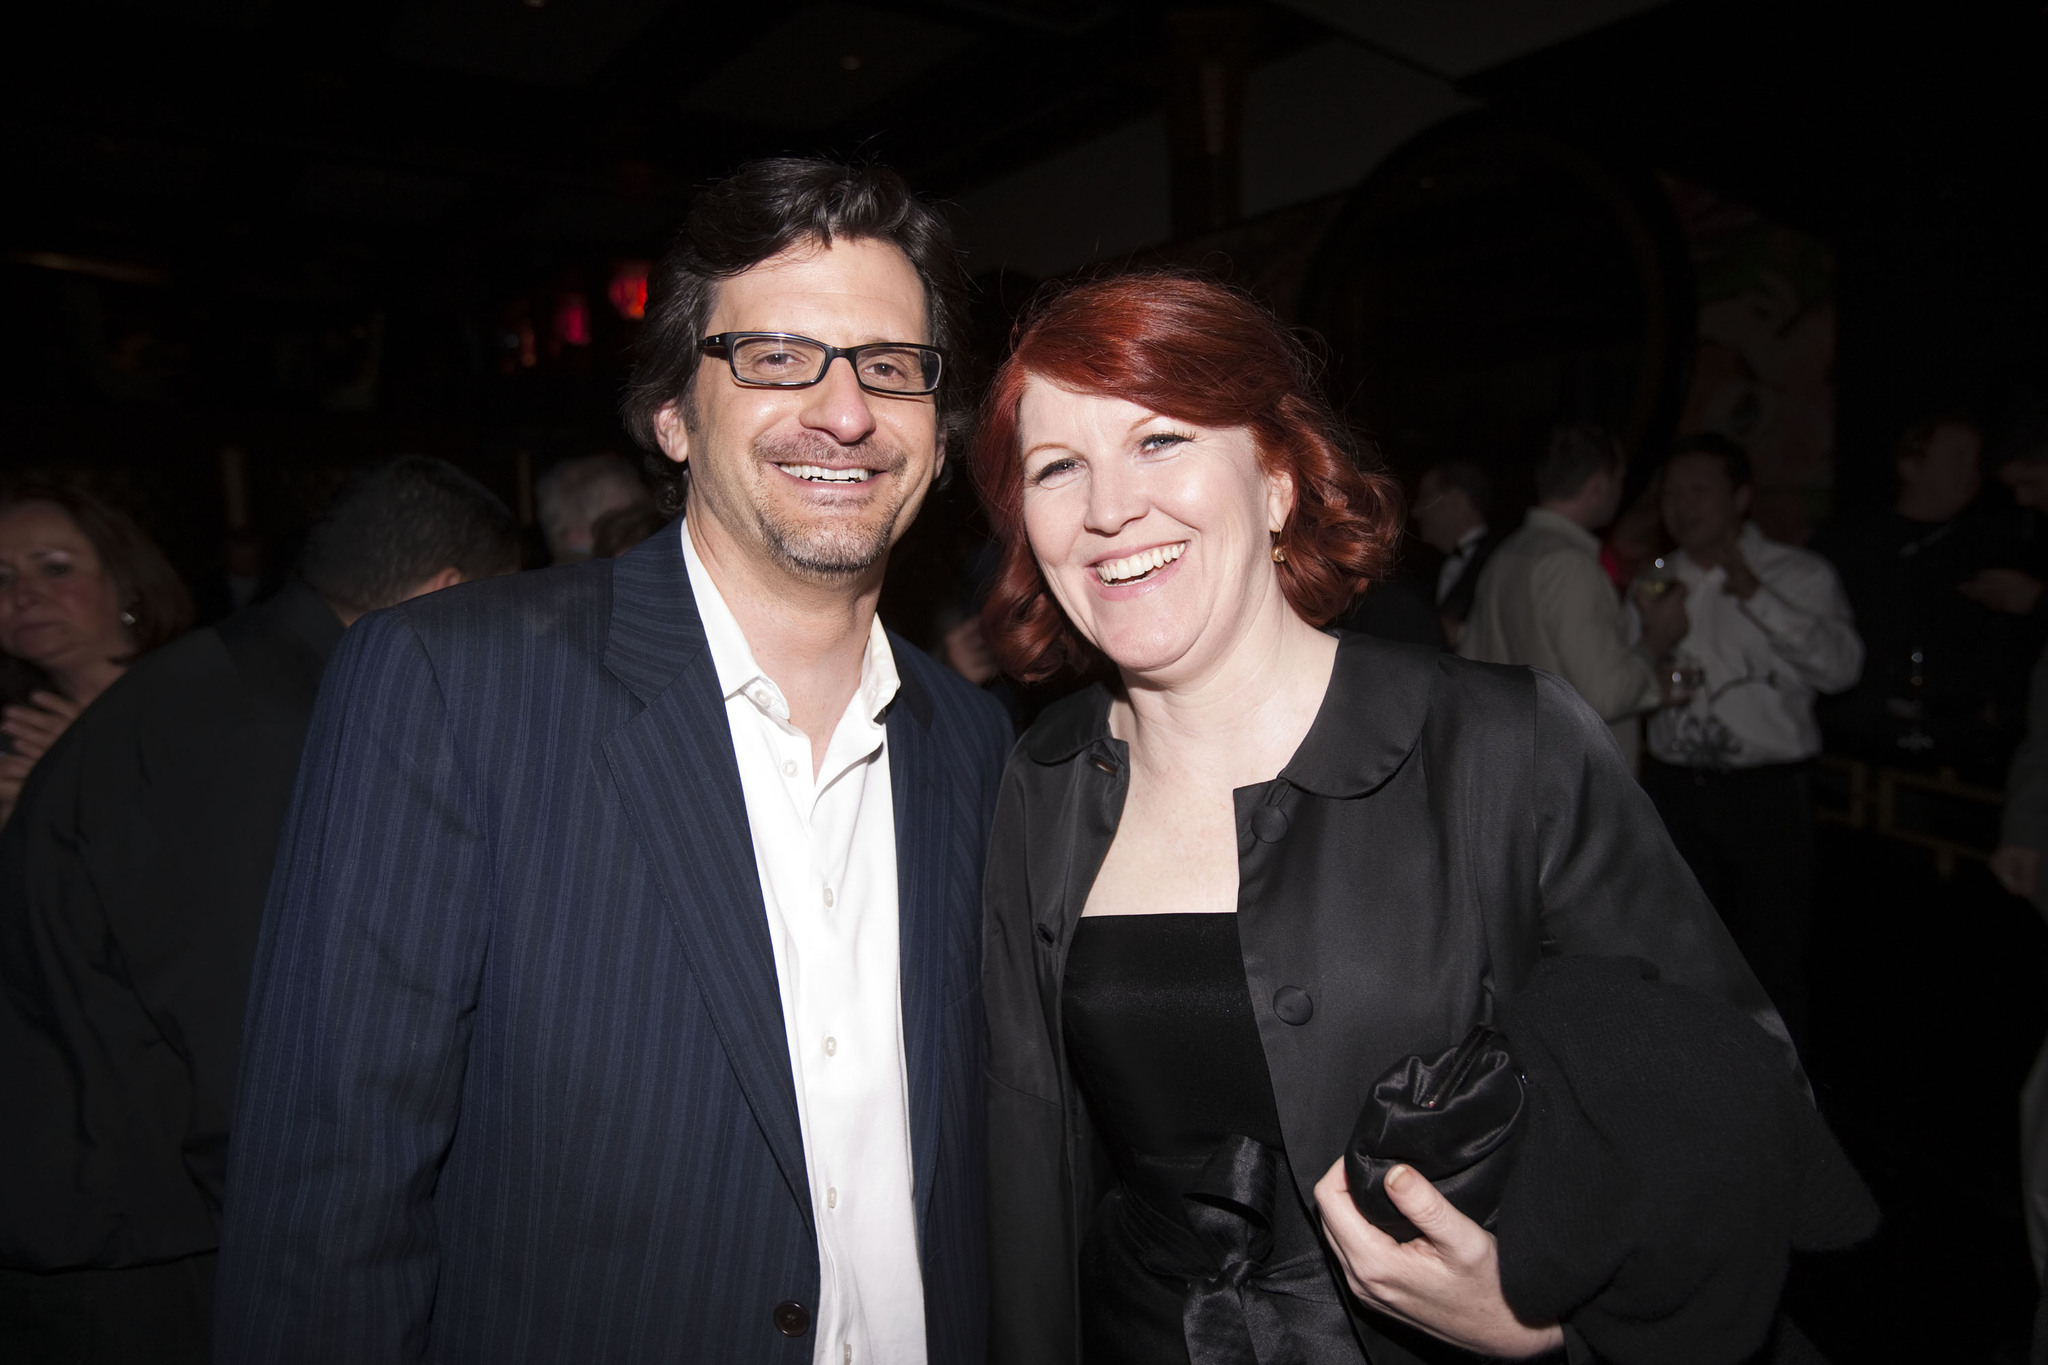 Kate Flannery and Ben Mankiewicz